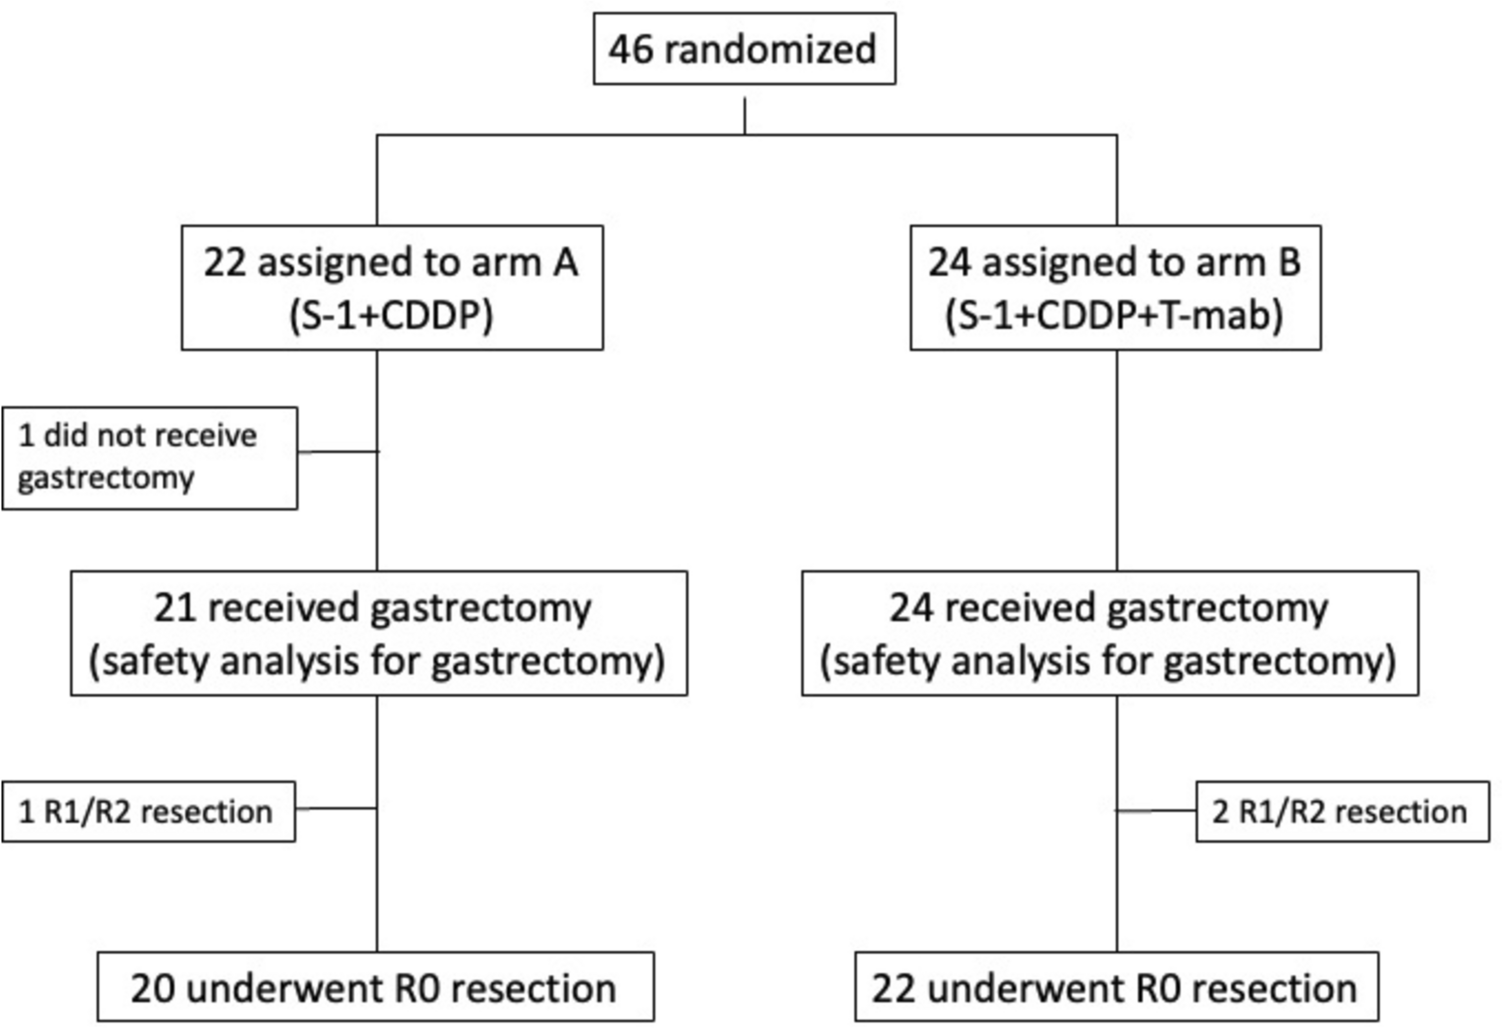 Early endpoints of a randomized phase II trial of preoperative chemotherapy with S-1/CDDP with or without trastuzumab followed by surgery for HER2-positive resectable gastric or esophagogastric junction adenocarcinoma with extensive lymph node metastasis: Japan Clinical Oncology Group study JCOG1301C (Trigger Study)